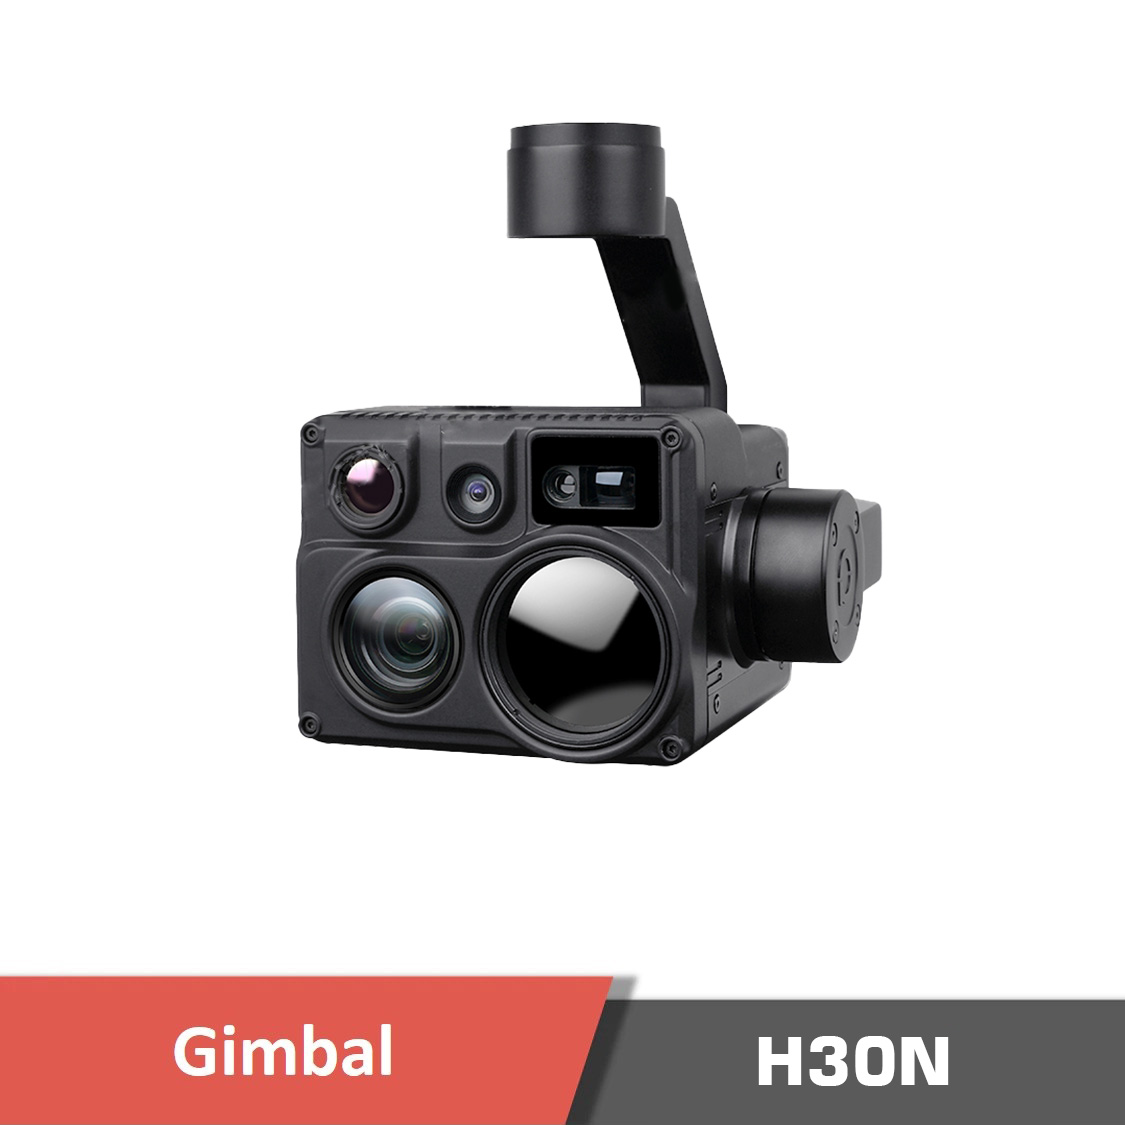 Template. H30n. 1 - mgt30b gimbal camera,ethernet,laser range finder,30x optical zoom,professional 3-axis high-precise foc program,hdmi,ai smart identify tracking,3-axis stabilizer,lightweight gimbal camera,uav ugv usv rc planes,small gimbal camera,s. Bus / uart / udp control signal input ports,s. Bus control signal output port,high-precise foc program - motionew - 1